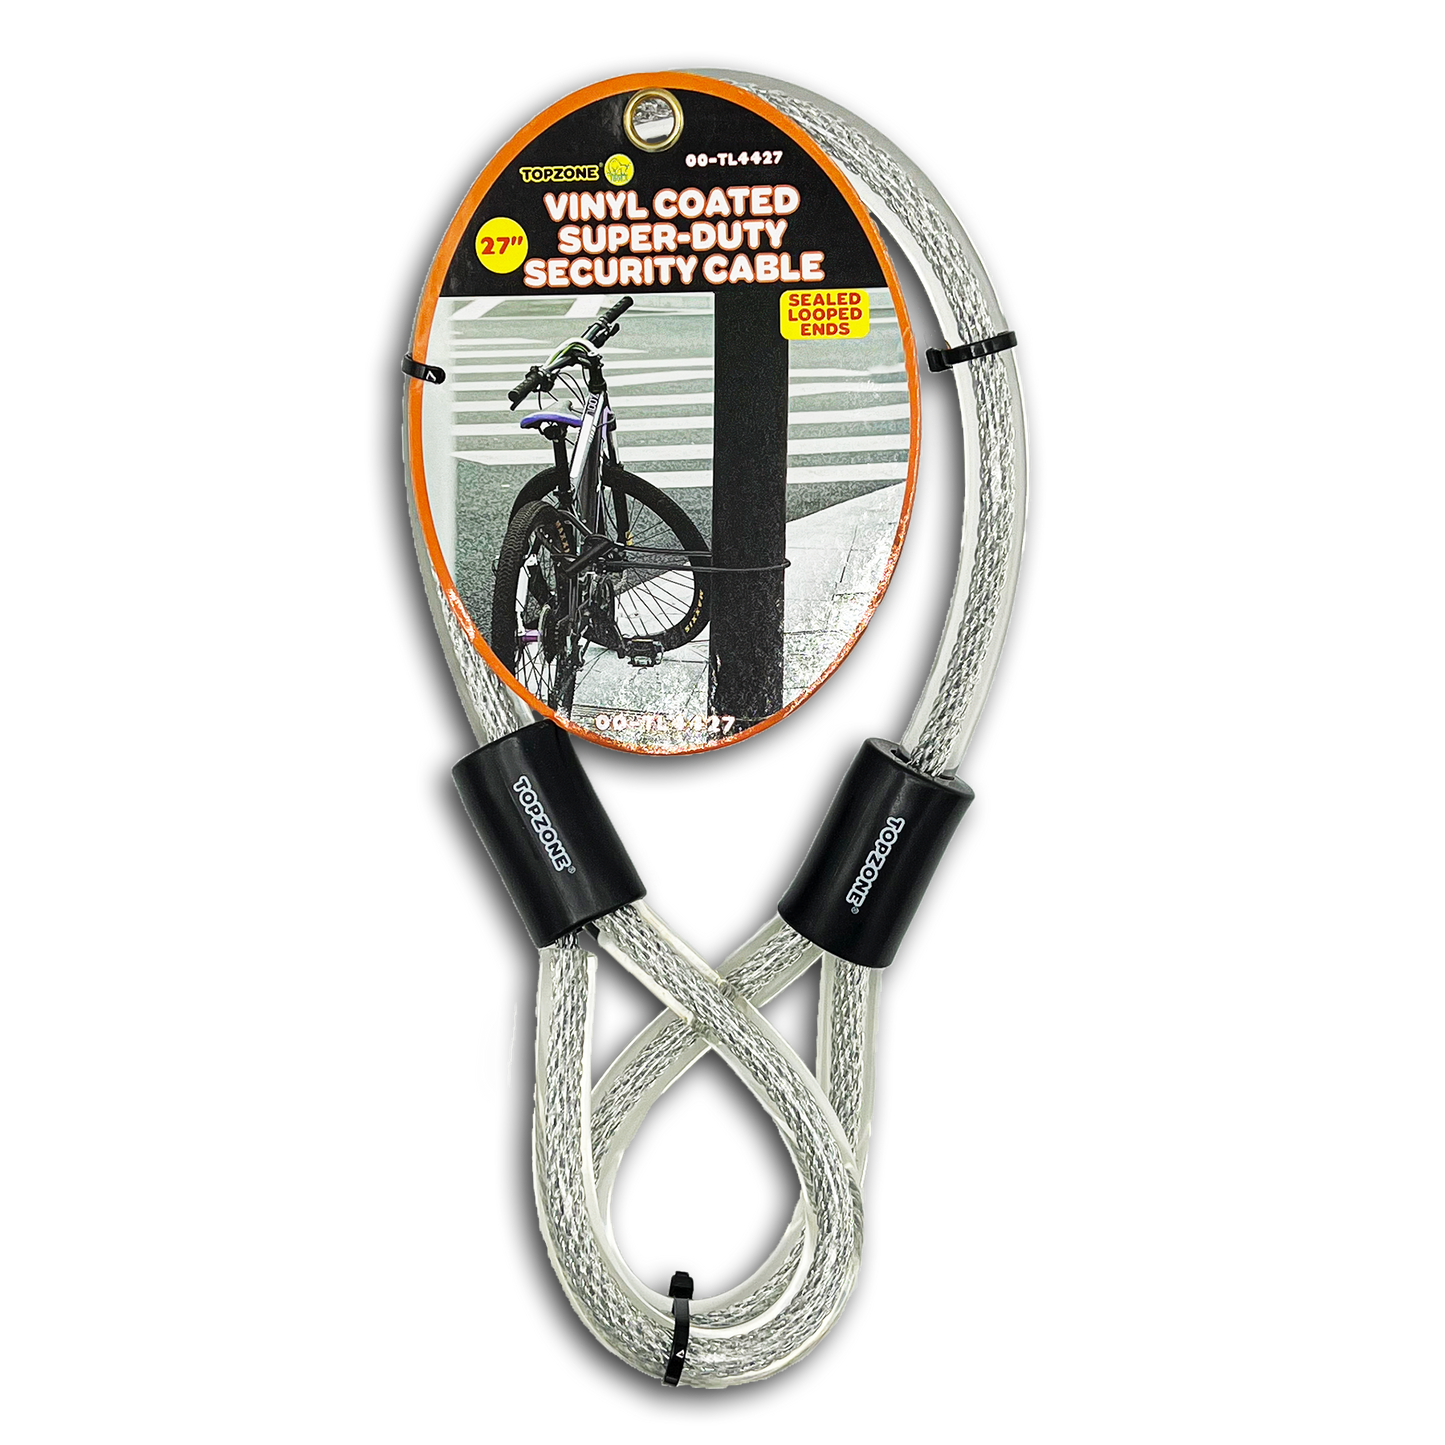 SUPER-DUTY SECURITY CABLE